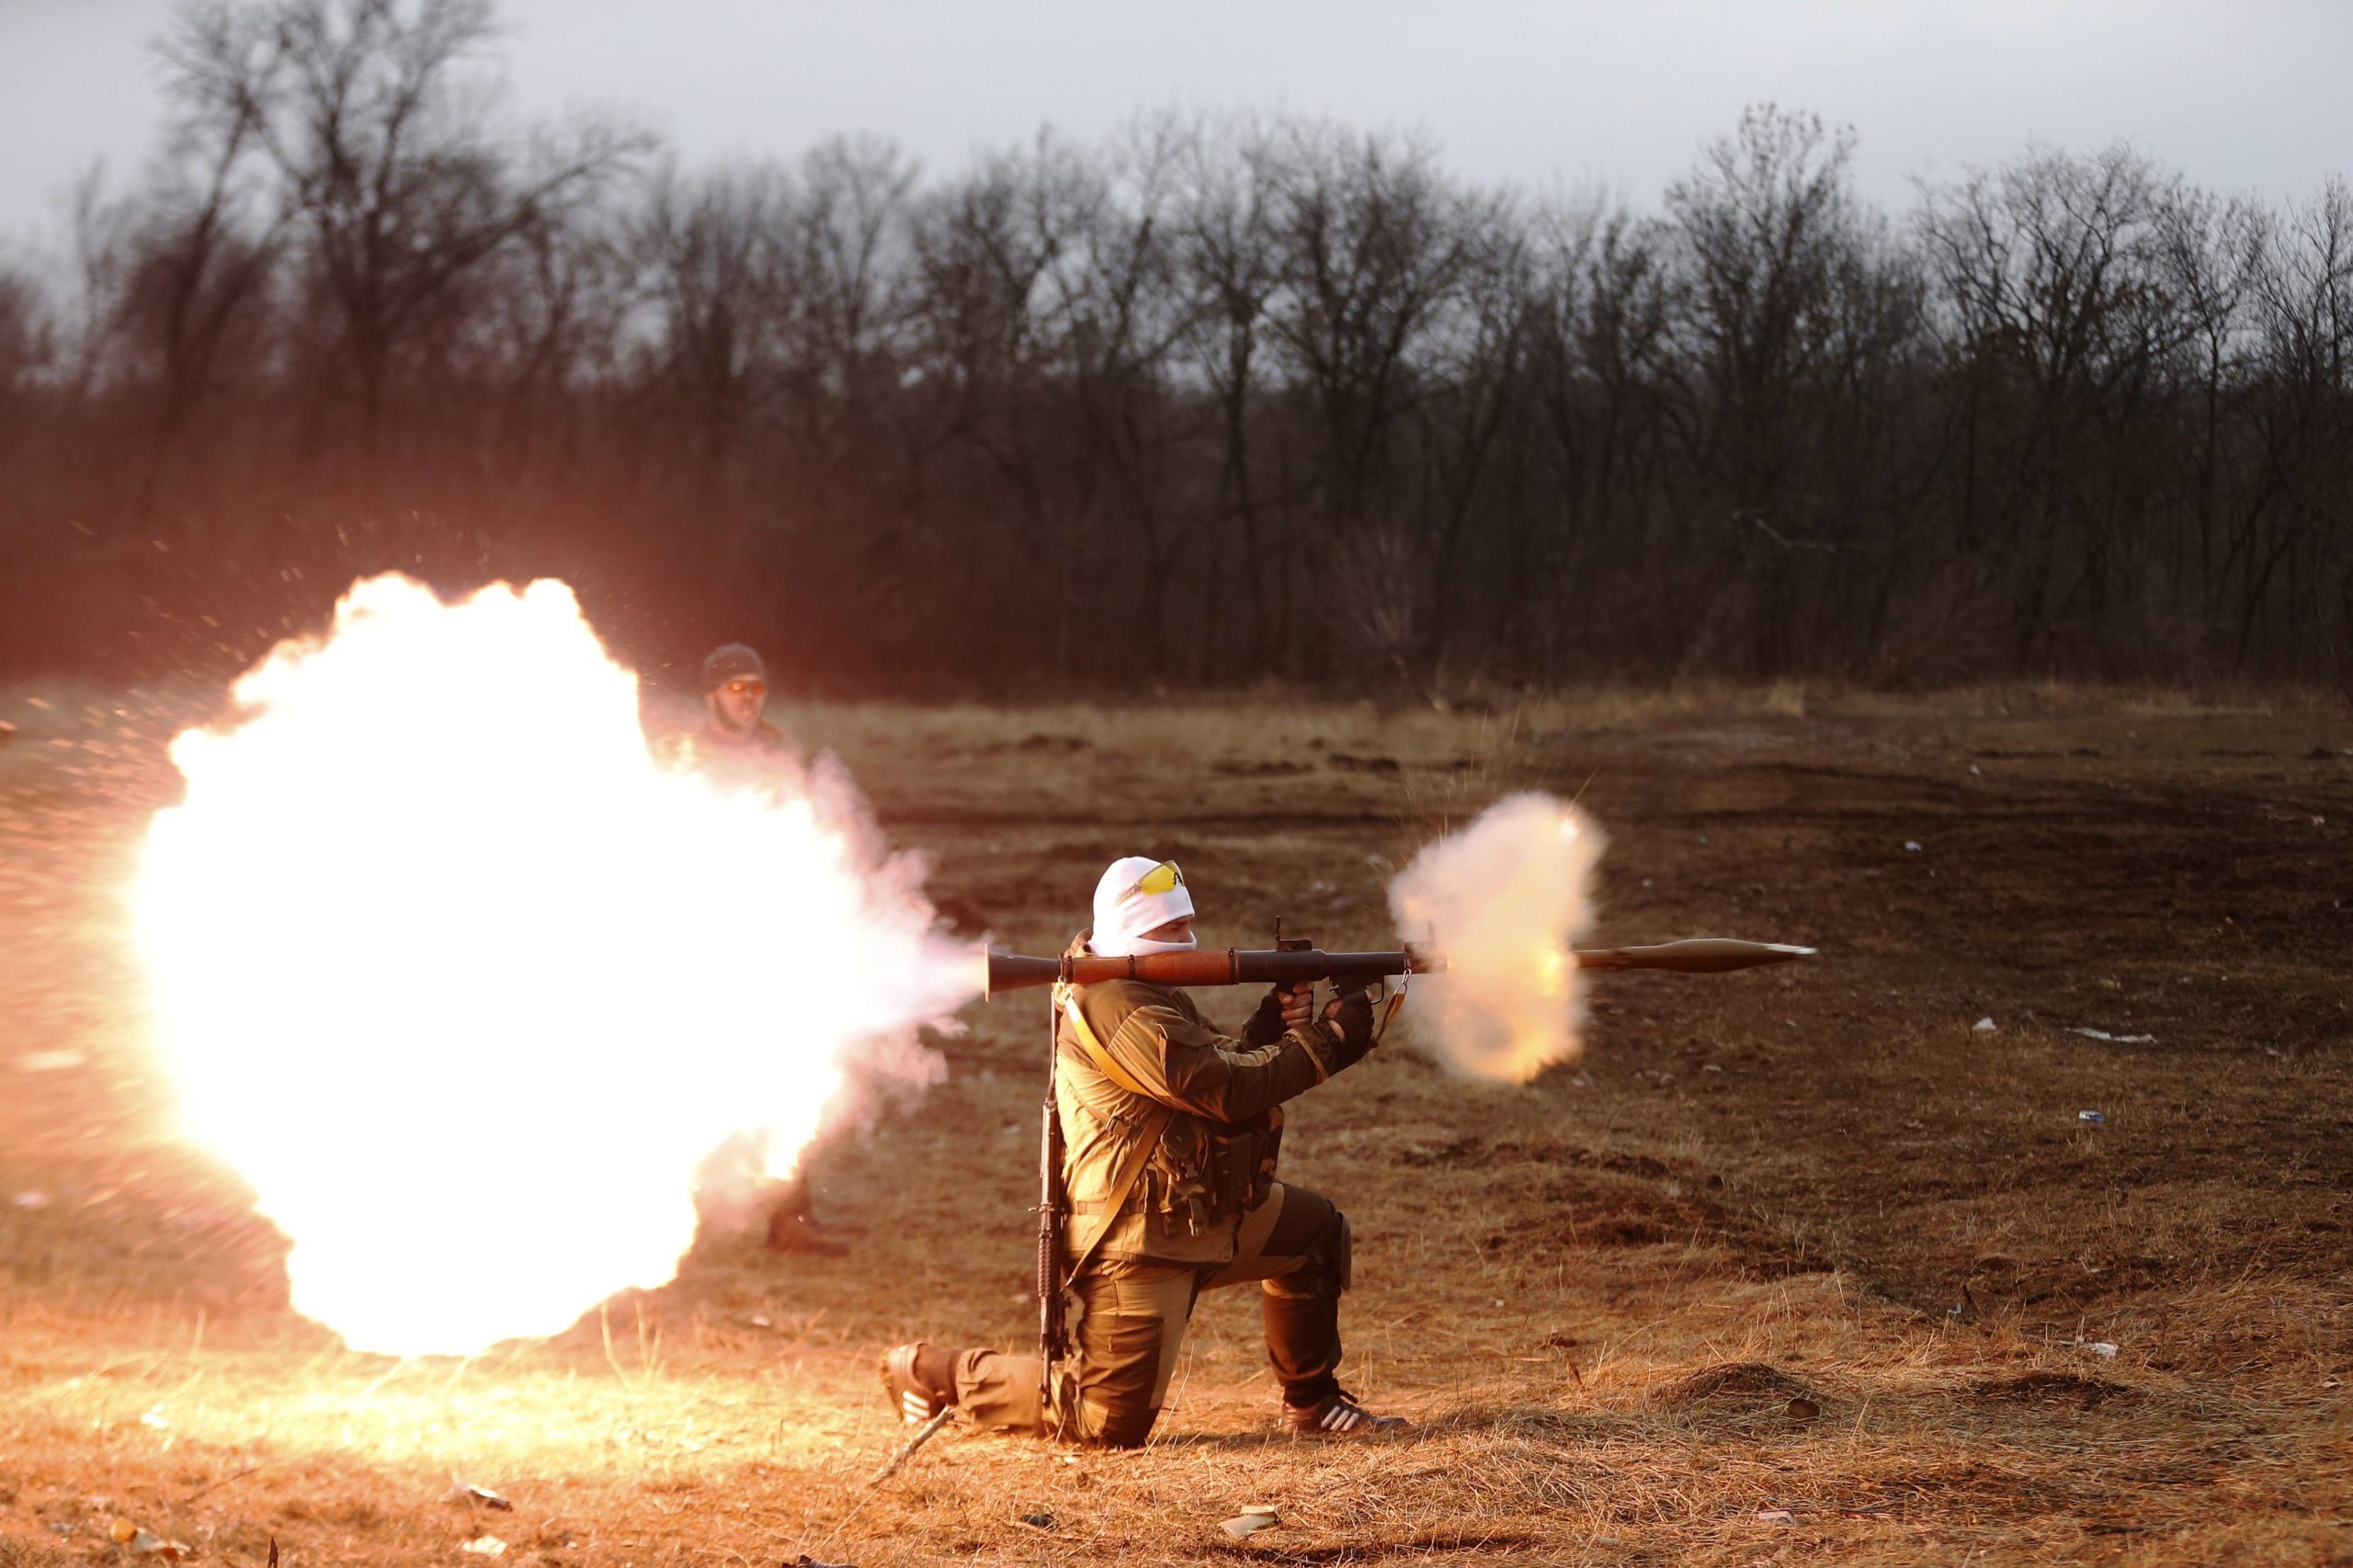 A volunteer of the separatist self-proclaimed Donetsk People's Republican guard fires a rocket-propelled grenade (RPG) during shooting training in Donetsk